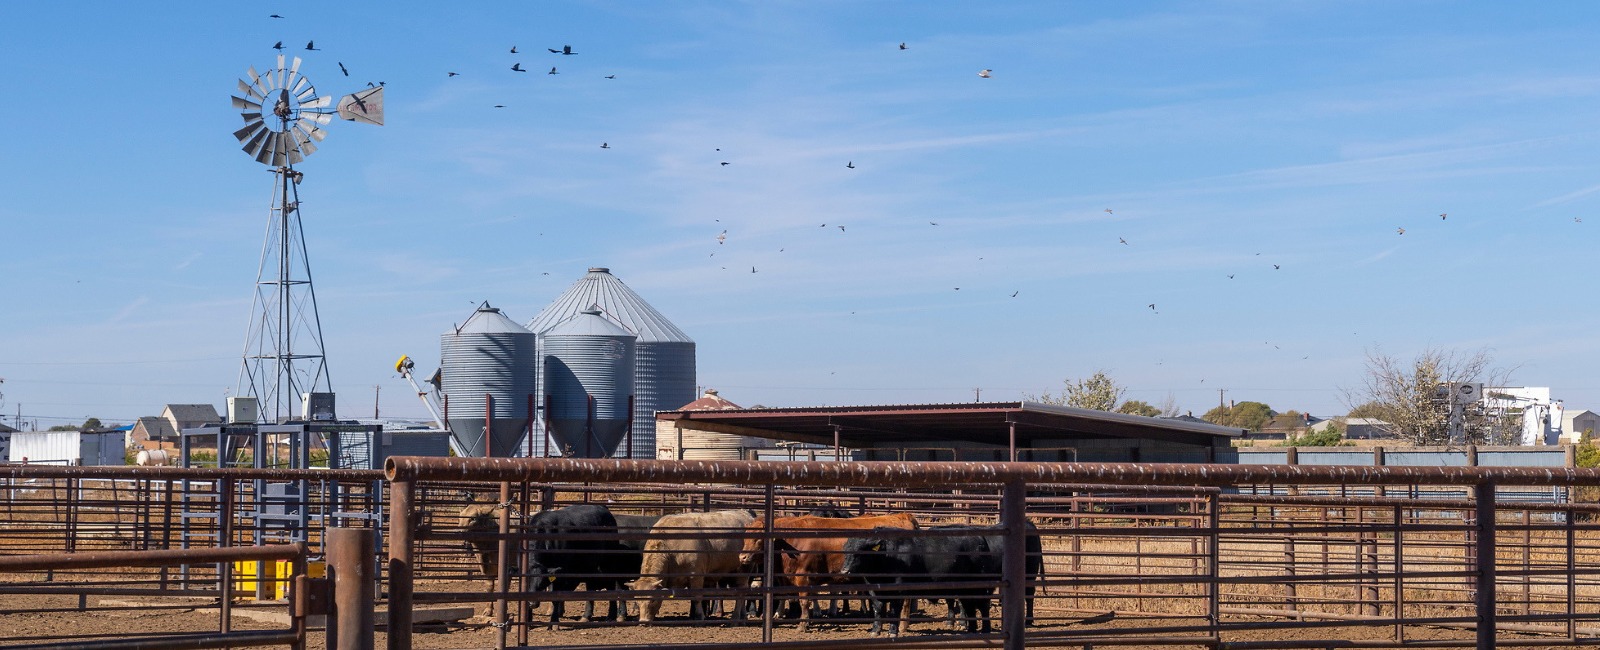 Wide shot of cattle in feed yard with silos  and a windmill in the background over clear skies